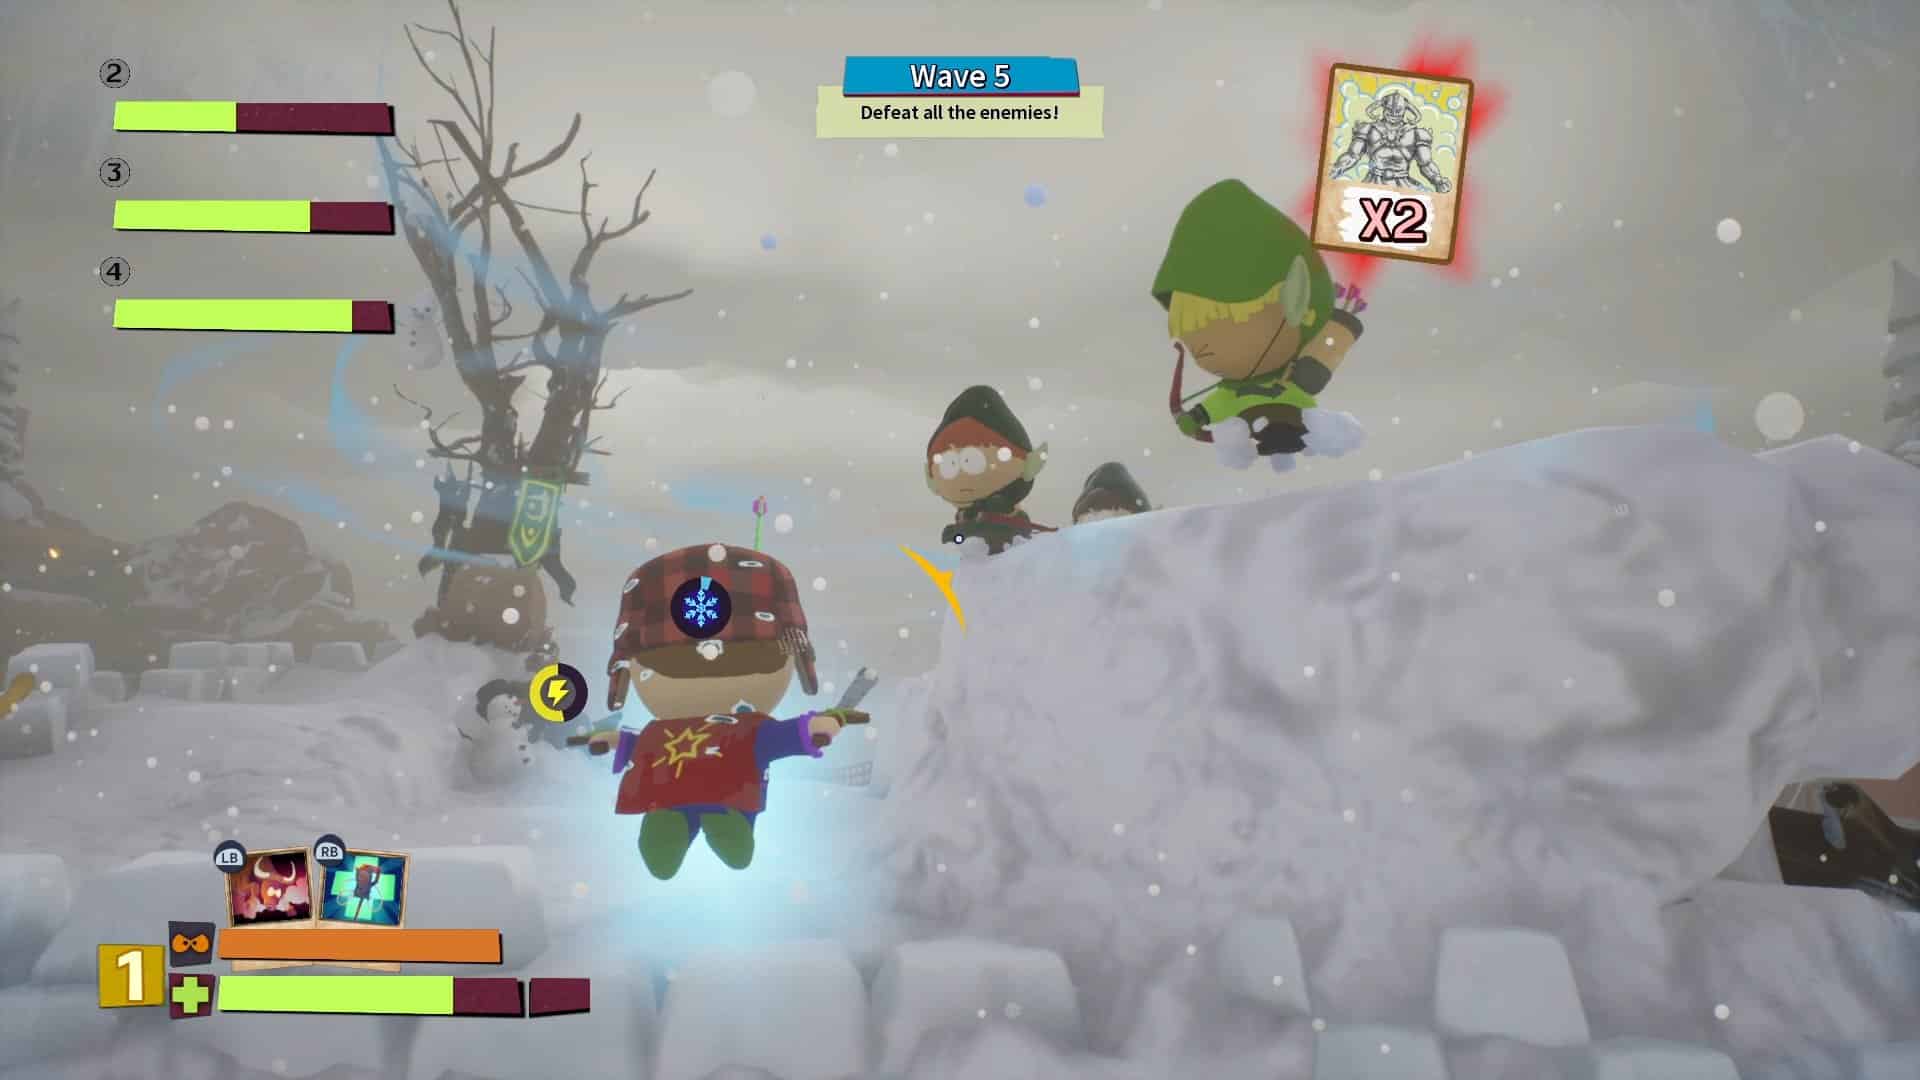 South Park: Snow Day! Review